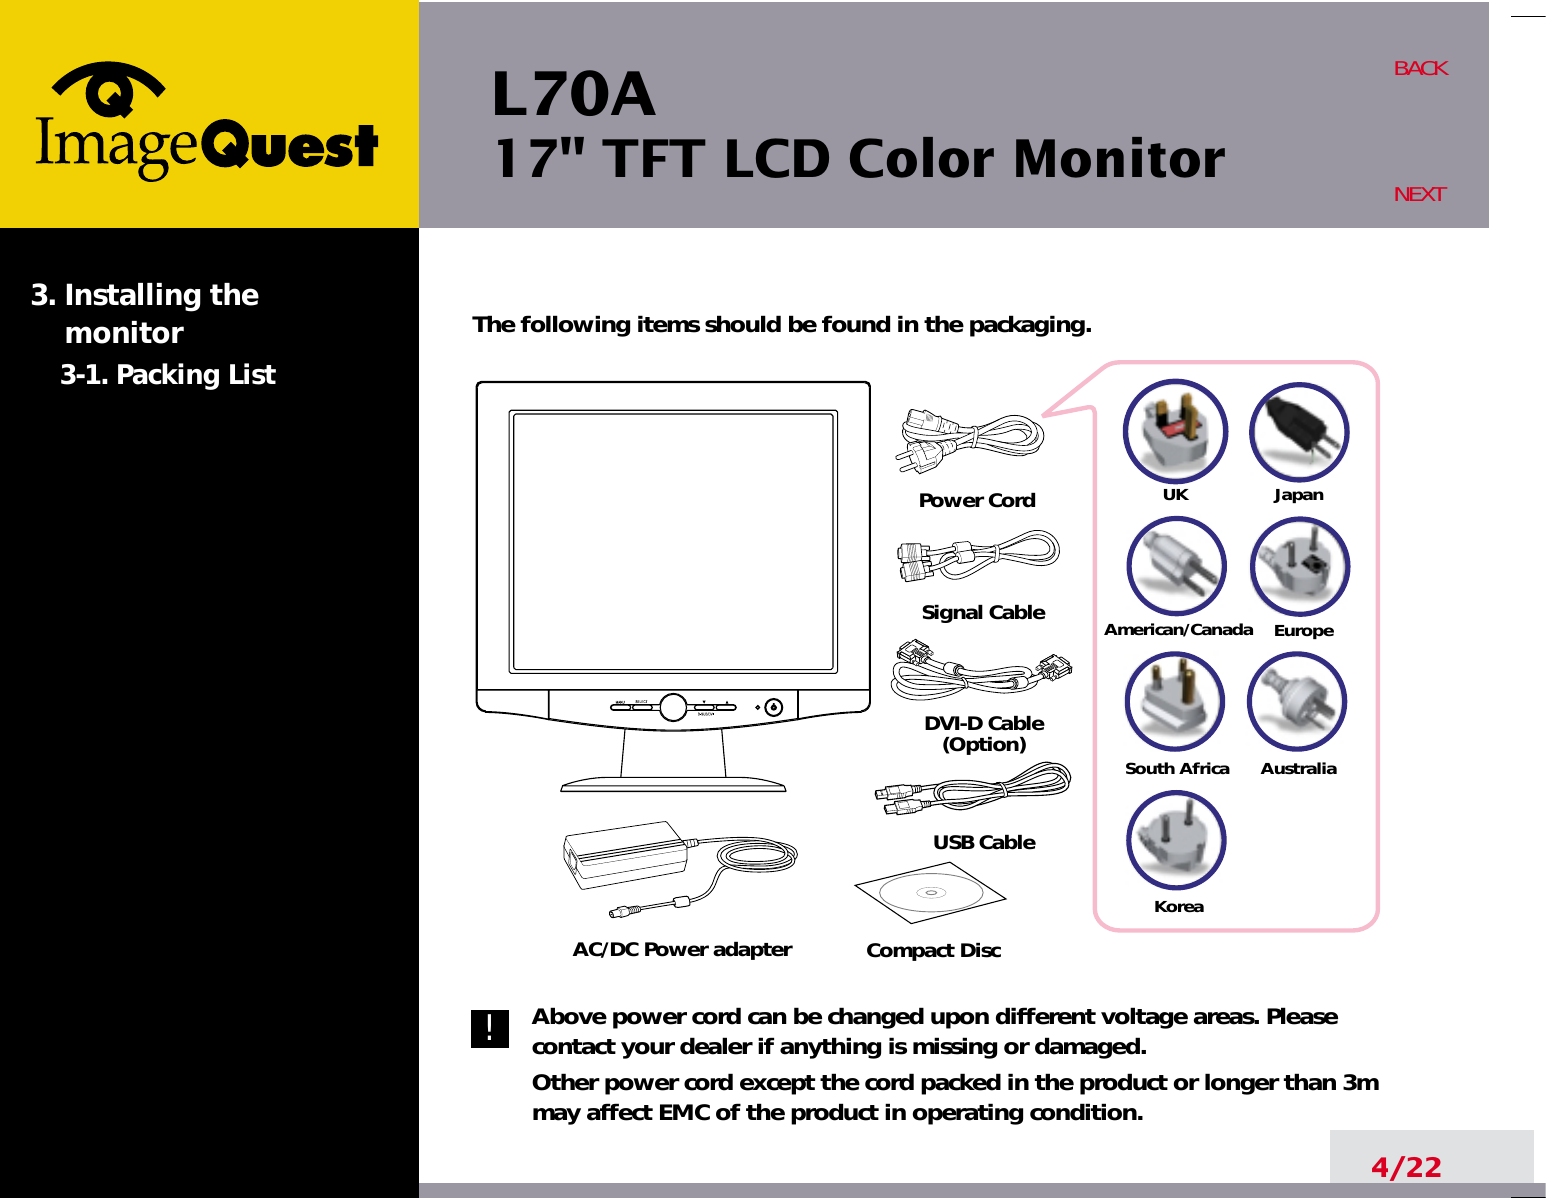 L70A17&quot; TFT LCD Color Monitor4/22BACKNEXTThe following items should be found in the packaging.Above power cord can be changed upon different voltage areas. Pleasecontact your dealer if anything is missing or damaged.Other power cord except the cord packed in the product or longer than 3mmay affect EMC of the product in operating condition.3. Installing the monitor3-1. Packing List!UKAmerican/CanadaJapanAustraliaKoreaEuropeSouth AfricaPower CordSignal CableDVI-D Cable(Option)USB CableAC/DC Power adapter Compact Disc